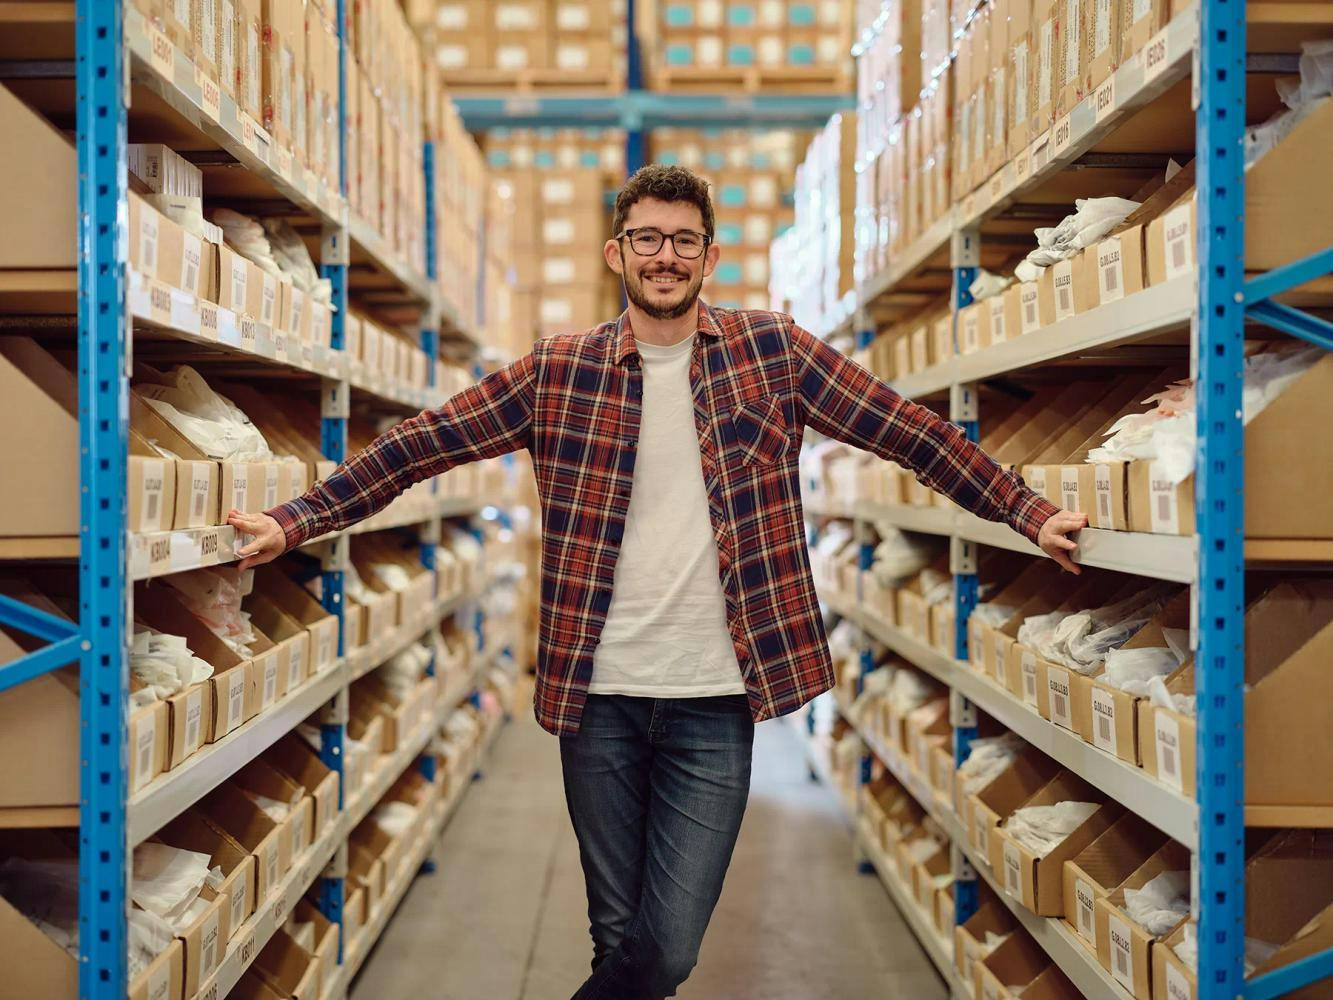 Man standing warehouse with hands on shelves